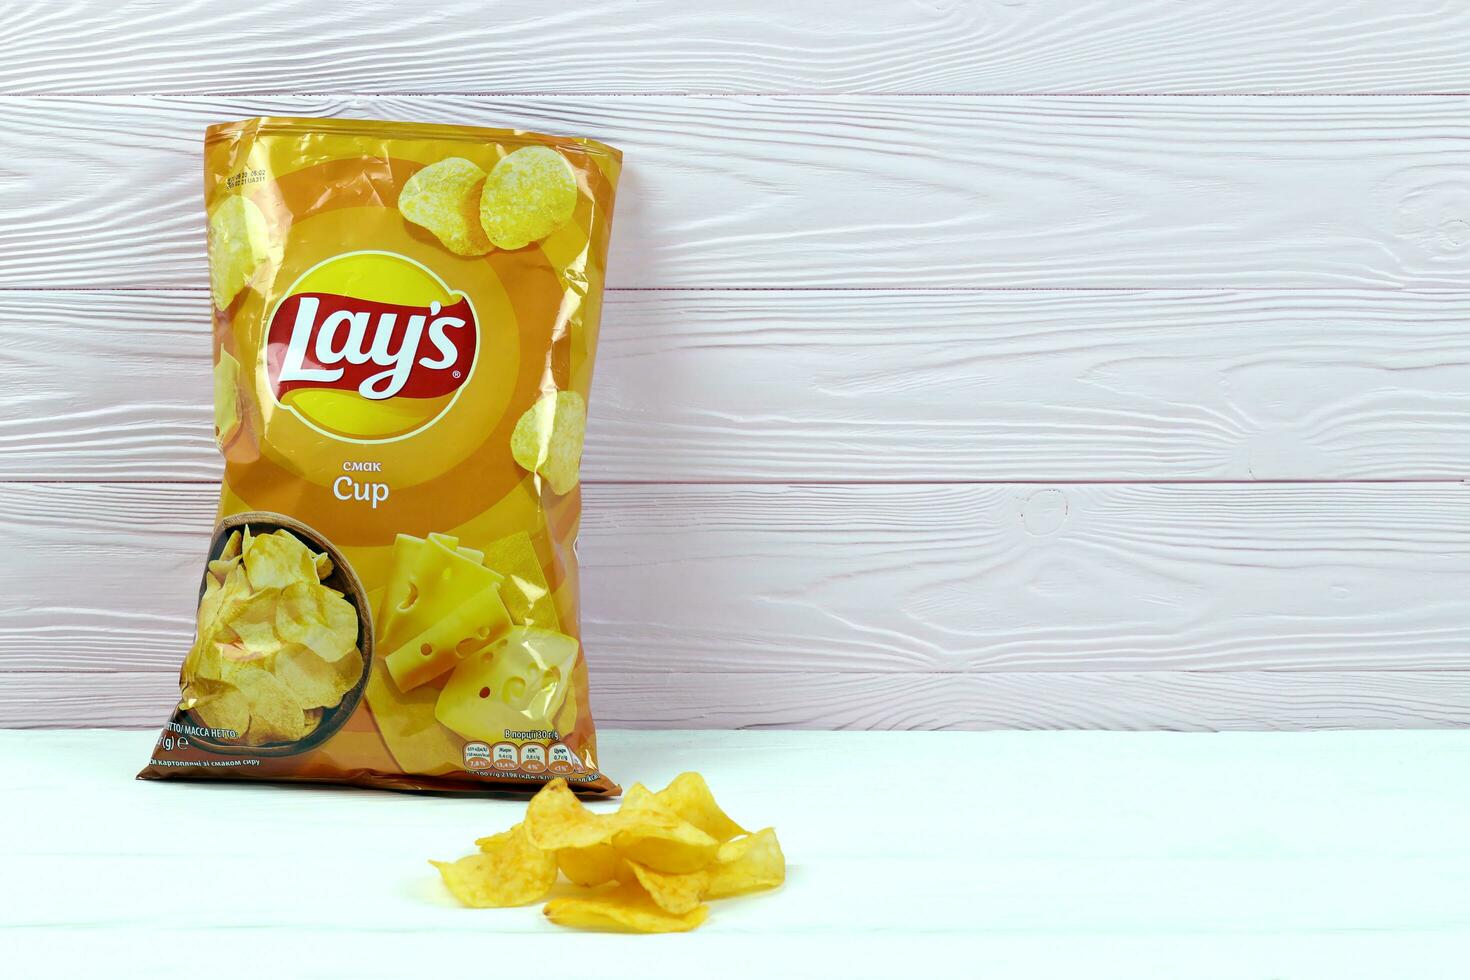 KHARKOV, UKRAINE - JANUARY 3, 2021 Lays potato chips with cheese flavour and original lays logo in middle of package. Worldwide famous brand of potato chips photo